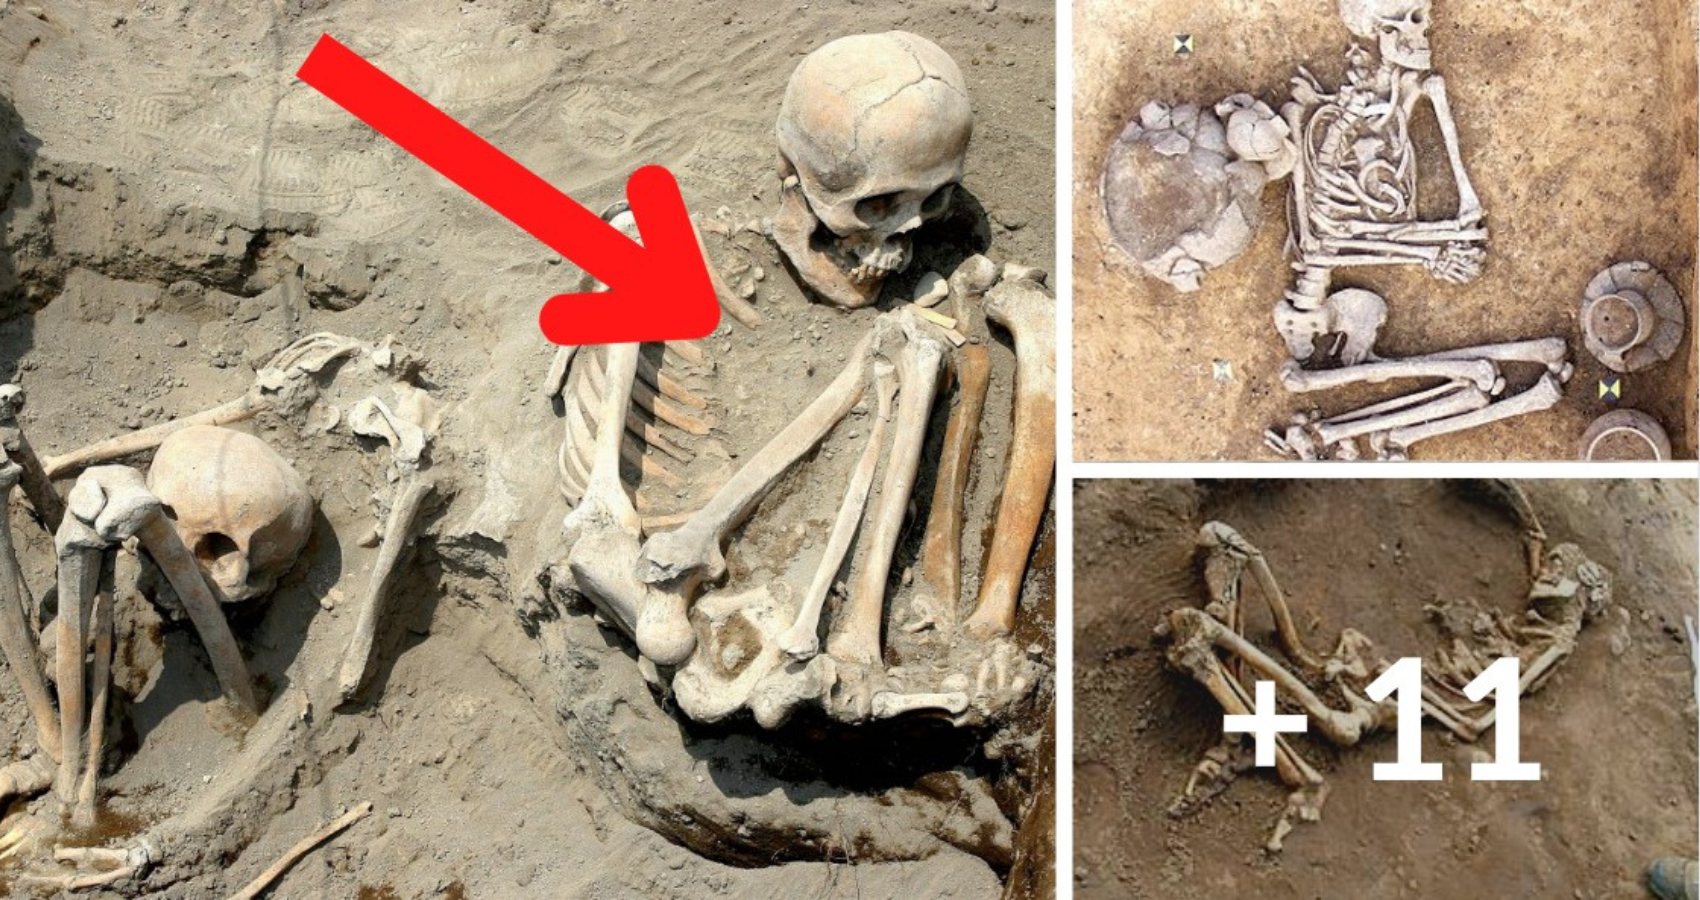 Massive human remains are frequently found in the Philippines. Archaeologists are putting forth a lot of effort to find